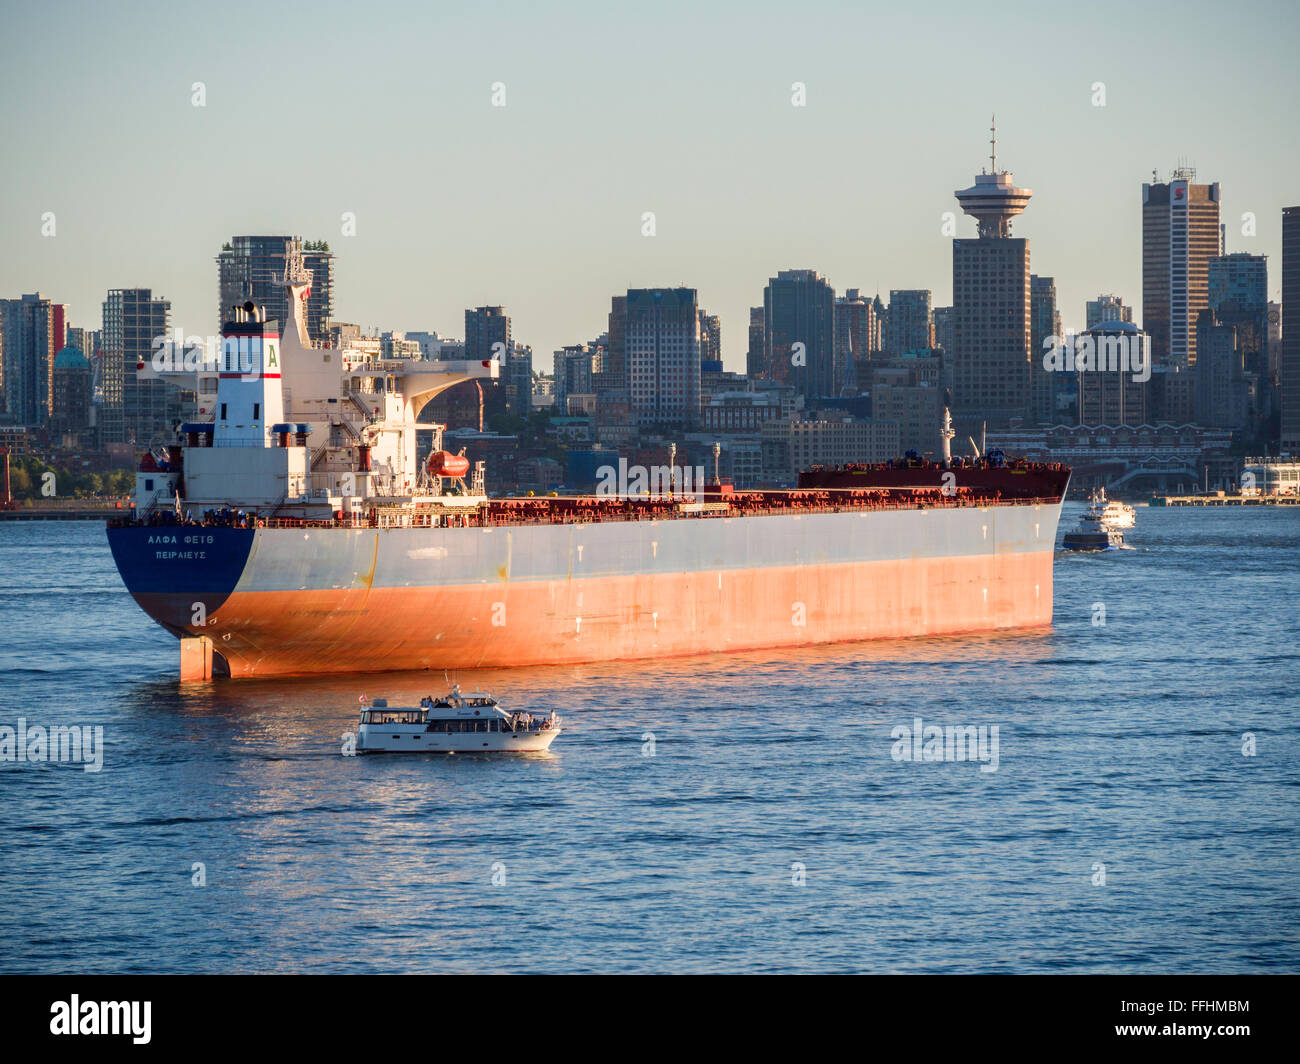 Bulk carrier 'Alpha Faith' (2008) awaits loading or unloading in Vancouver Harbour in front of Vancouver skyline. Stock Photo